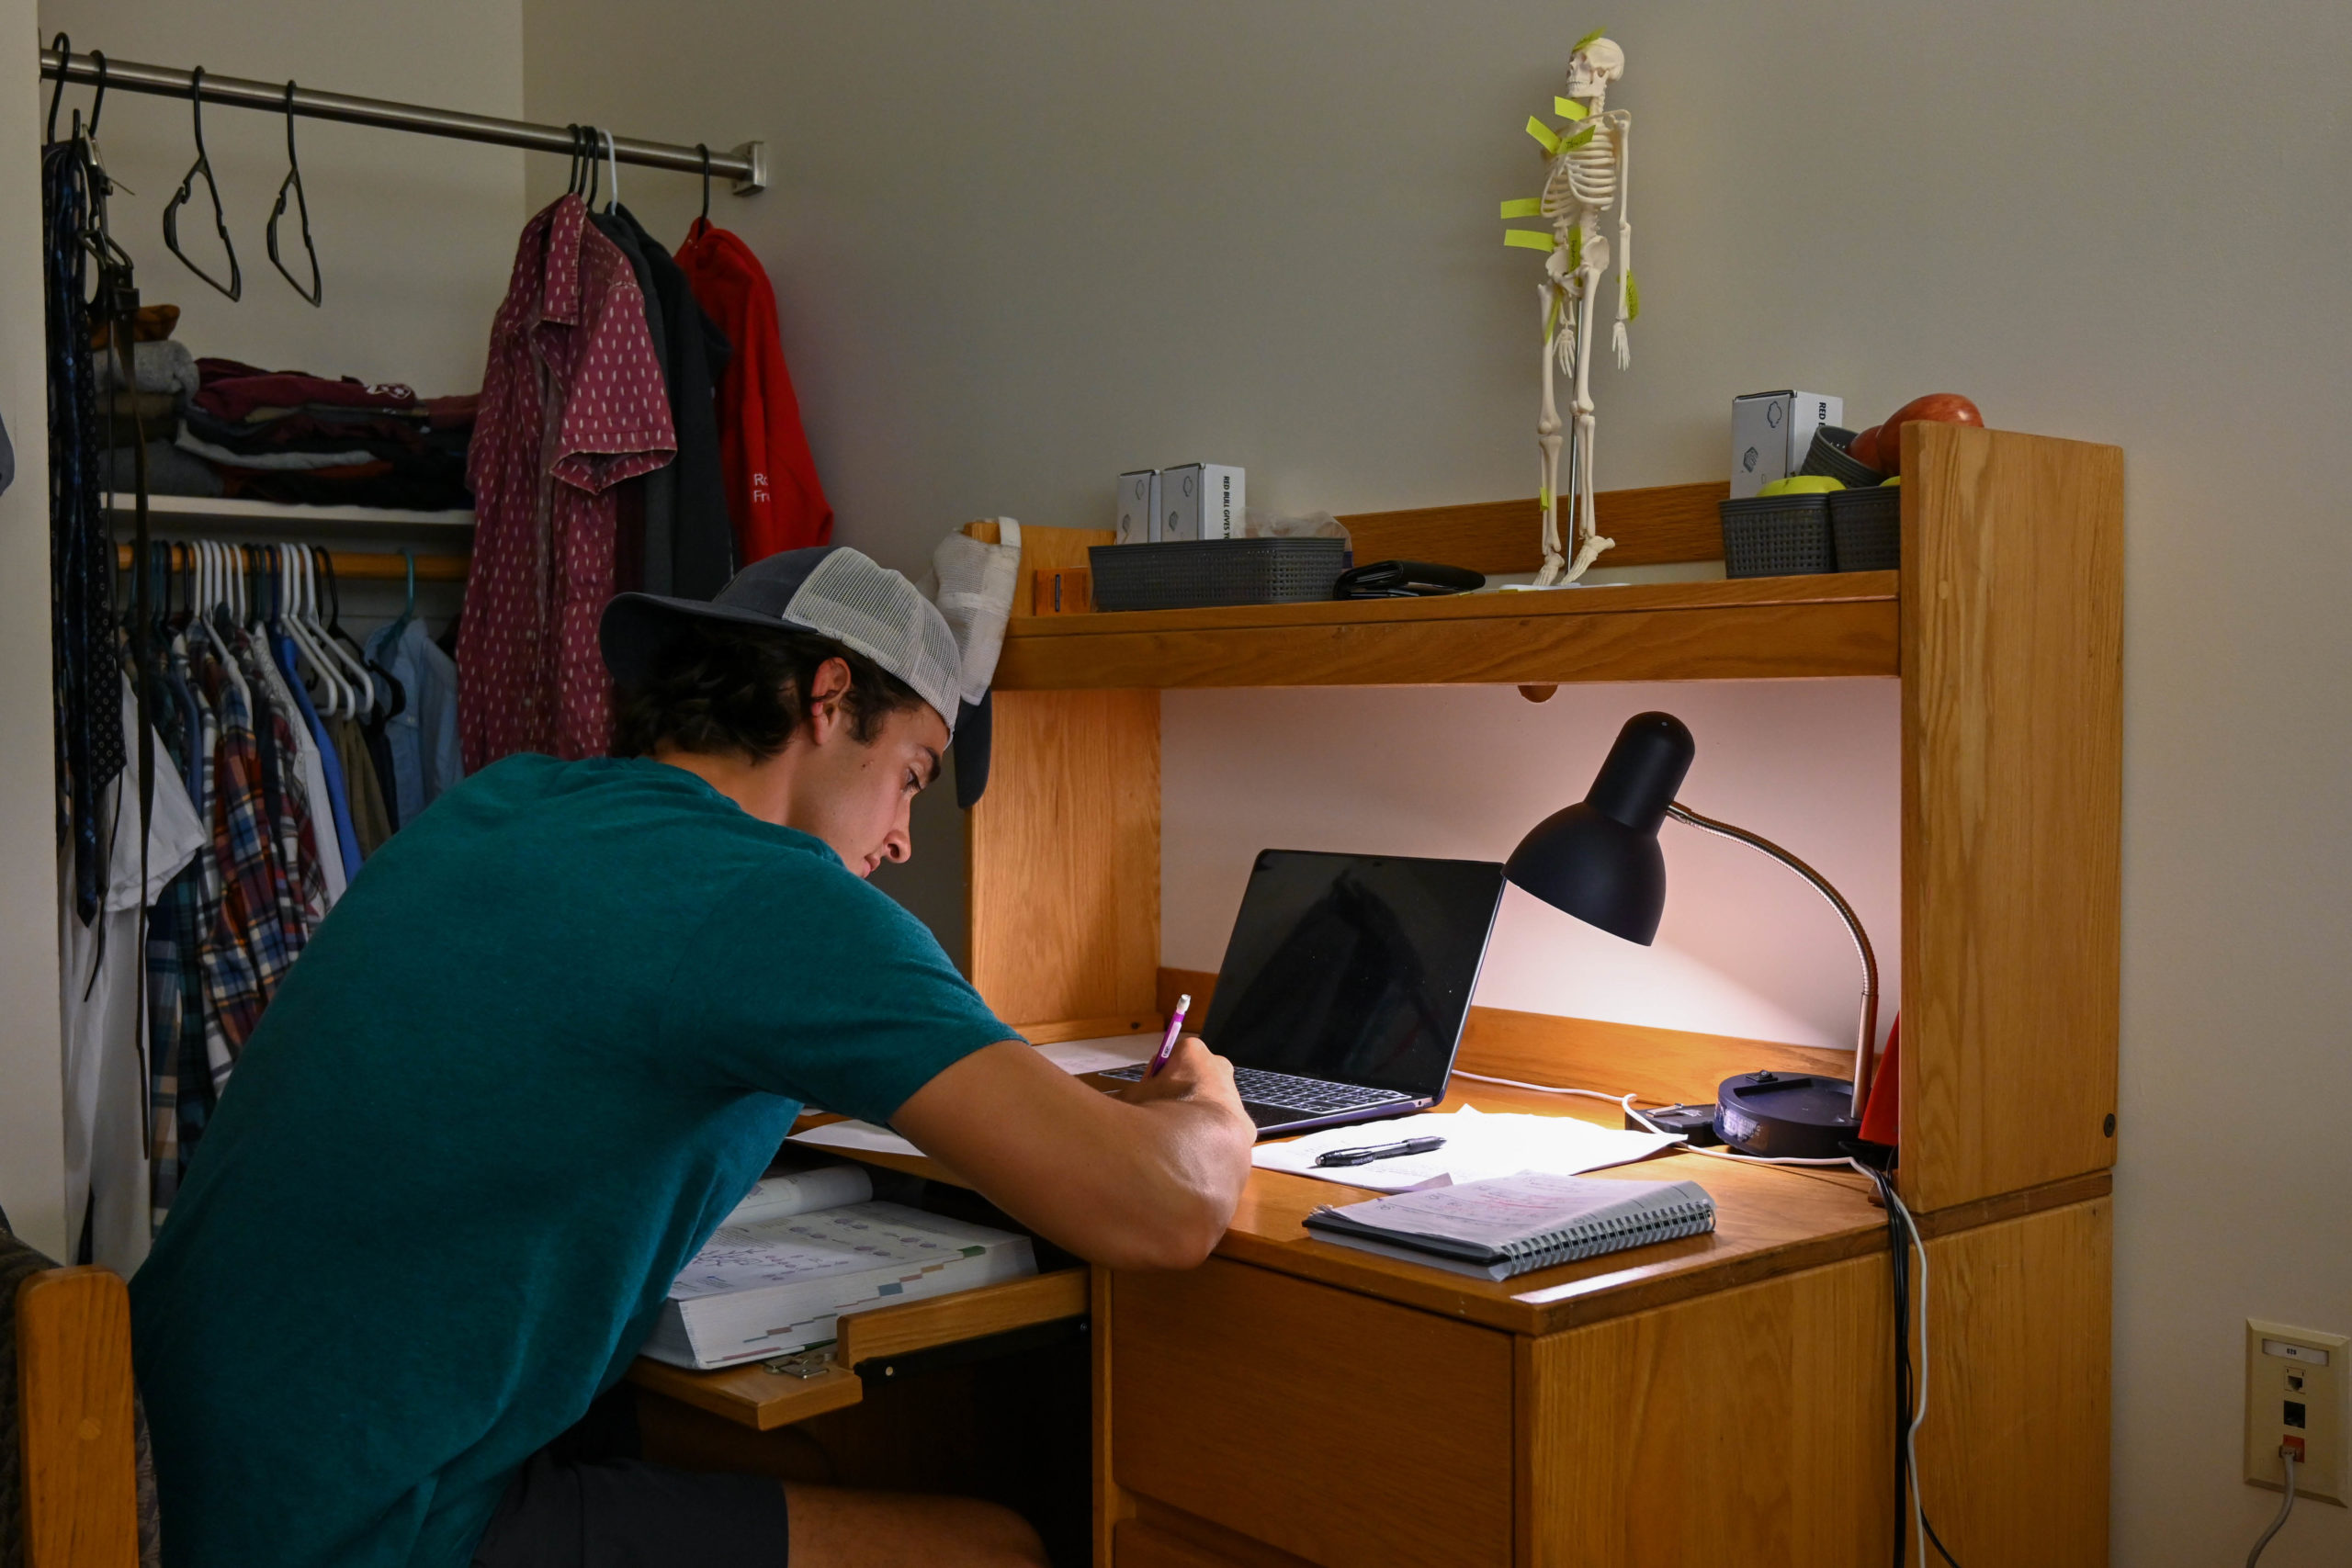 Settling In Away From Home – How Students are Acclimating into Dorms